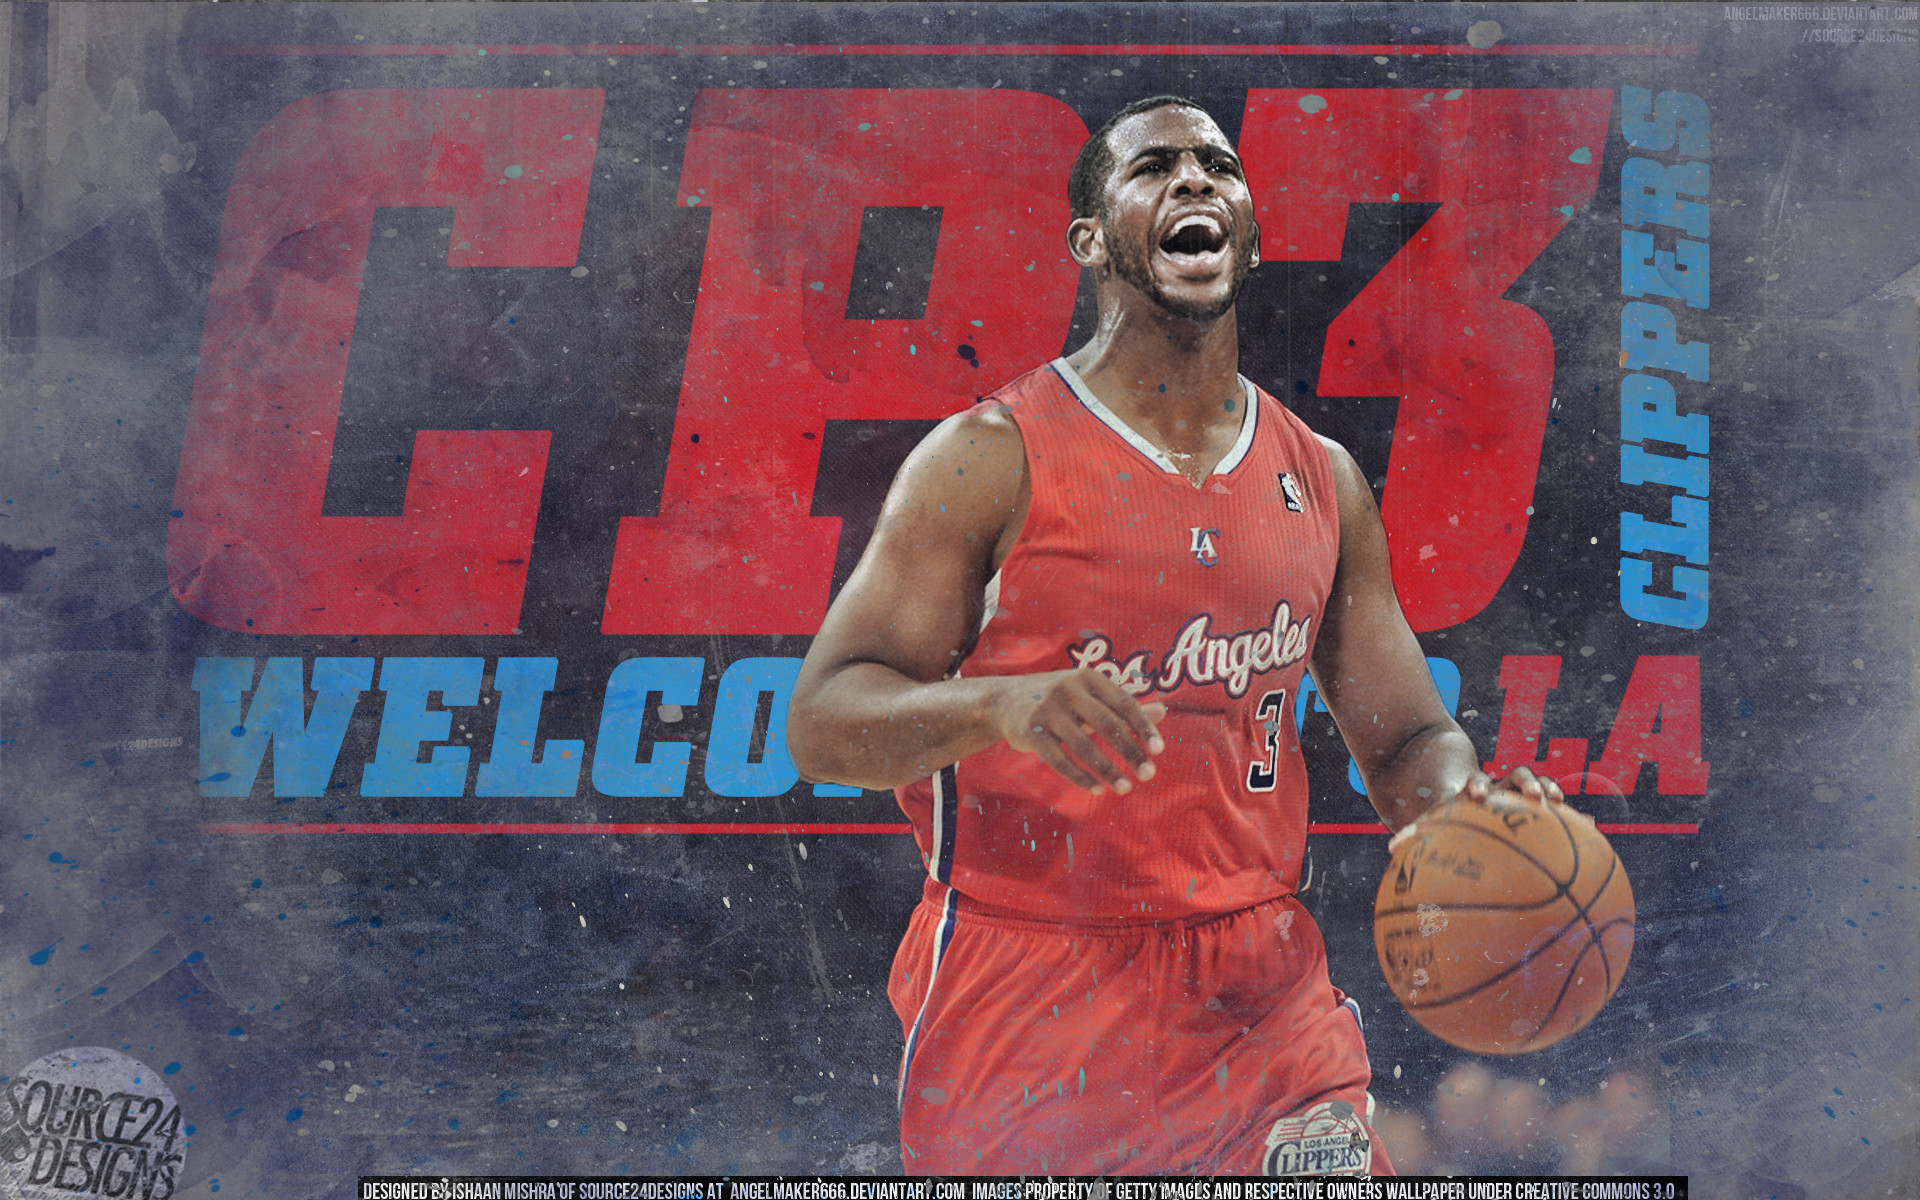 Ishaanmishra 42 11 Chris Paul Cp3 Clippers Wallpaper By Ishaanmishra 1920x1200